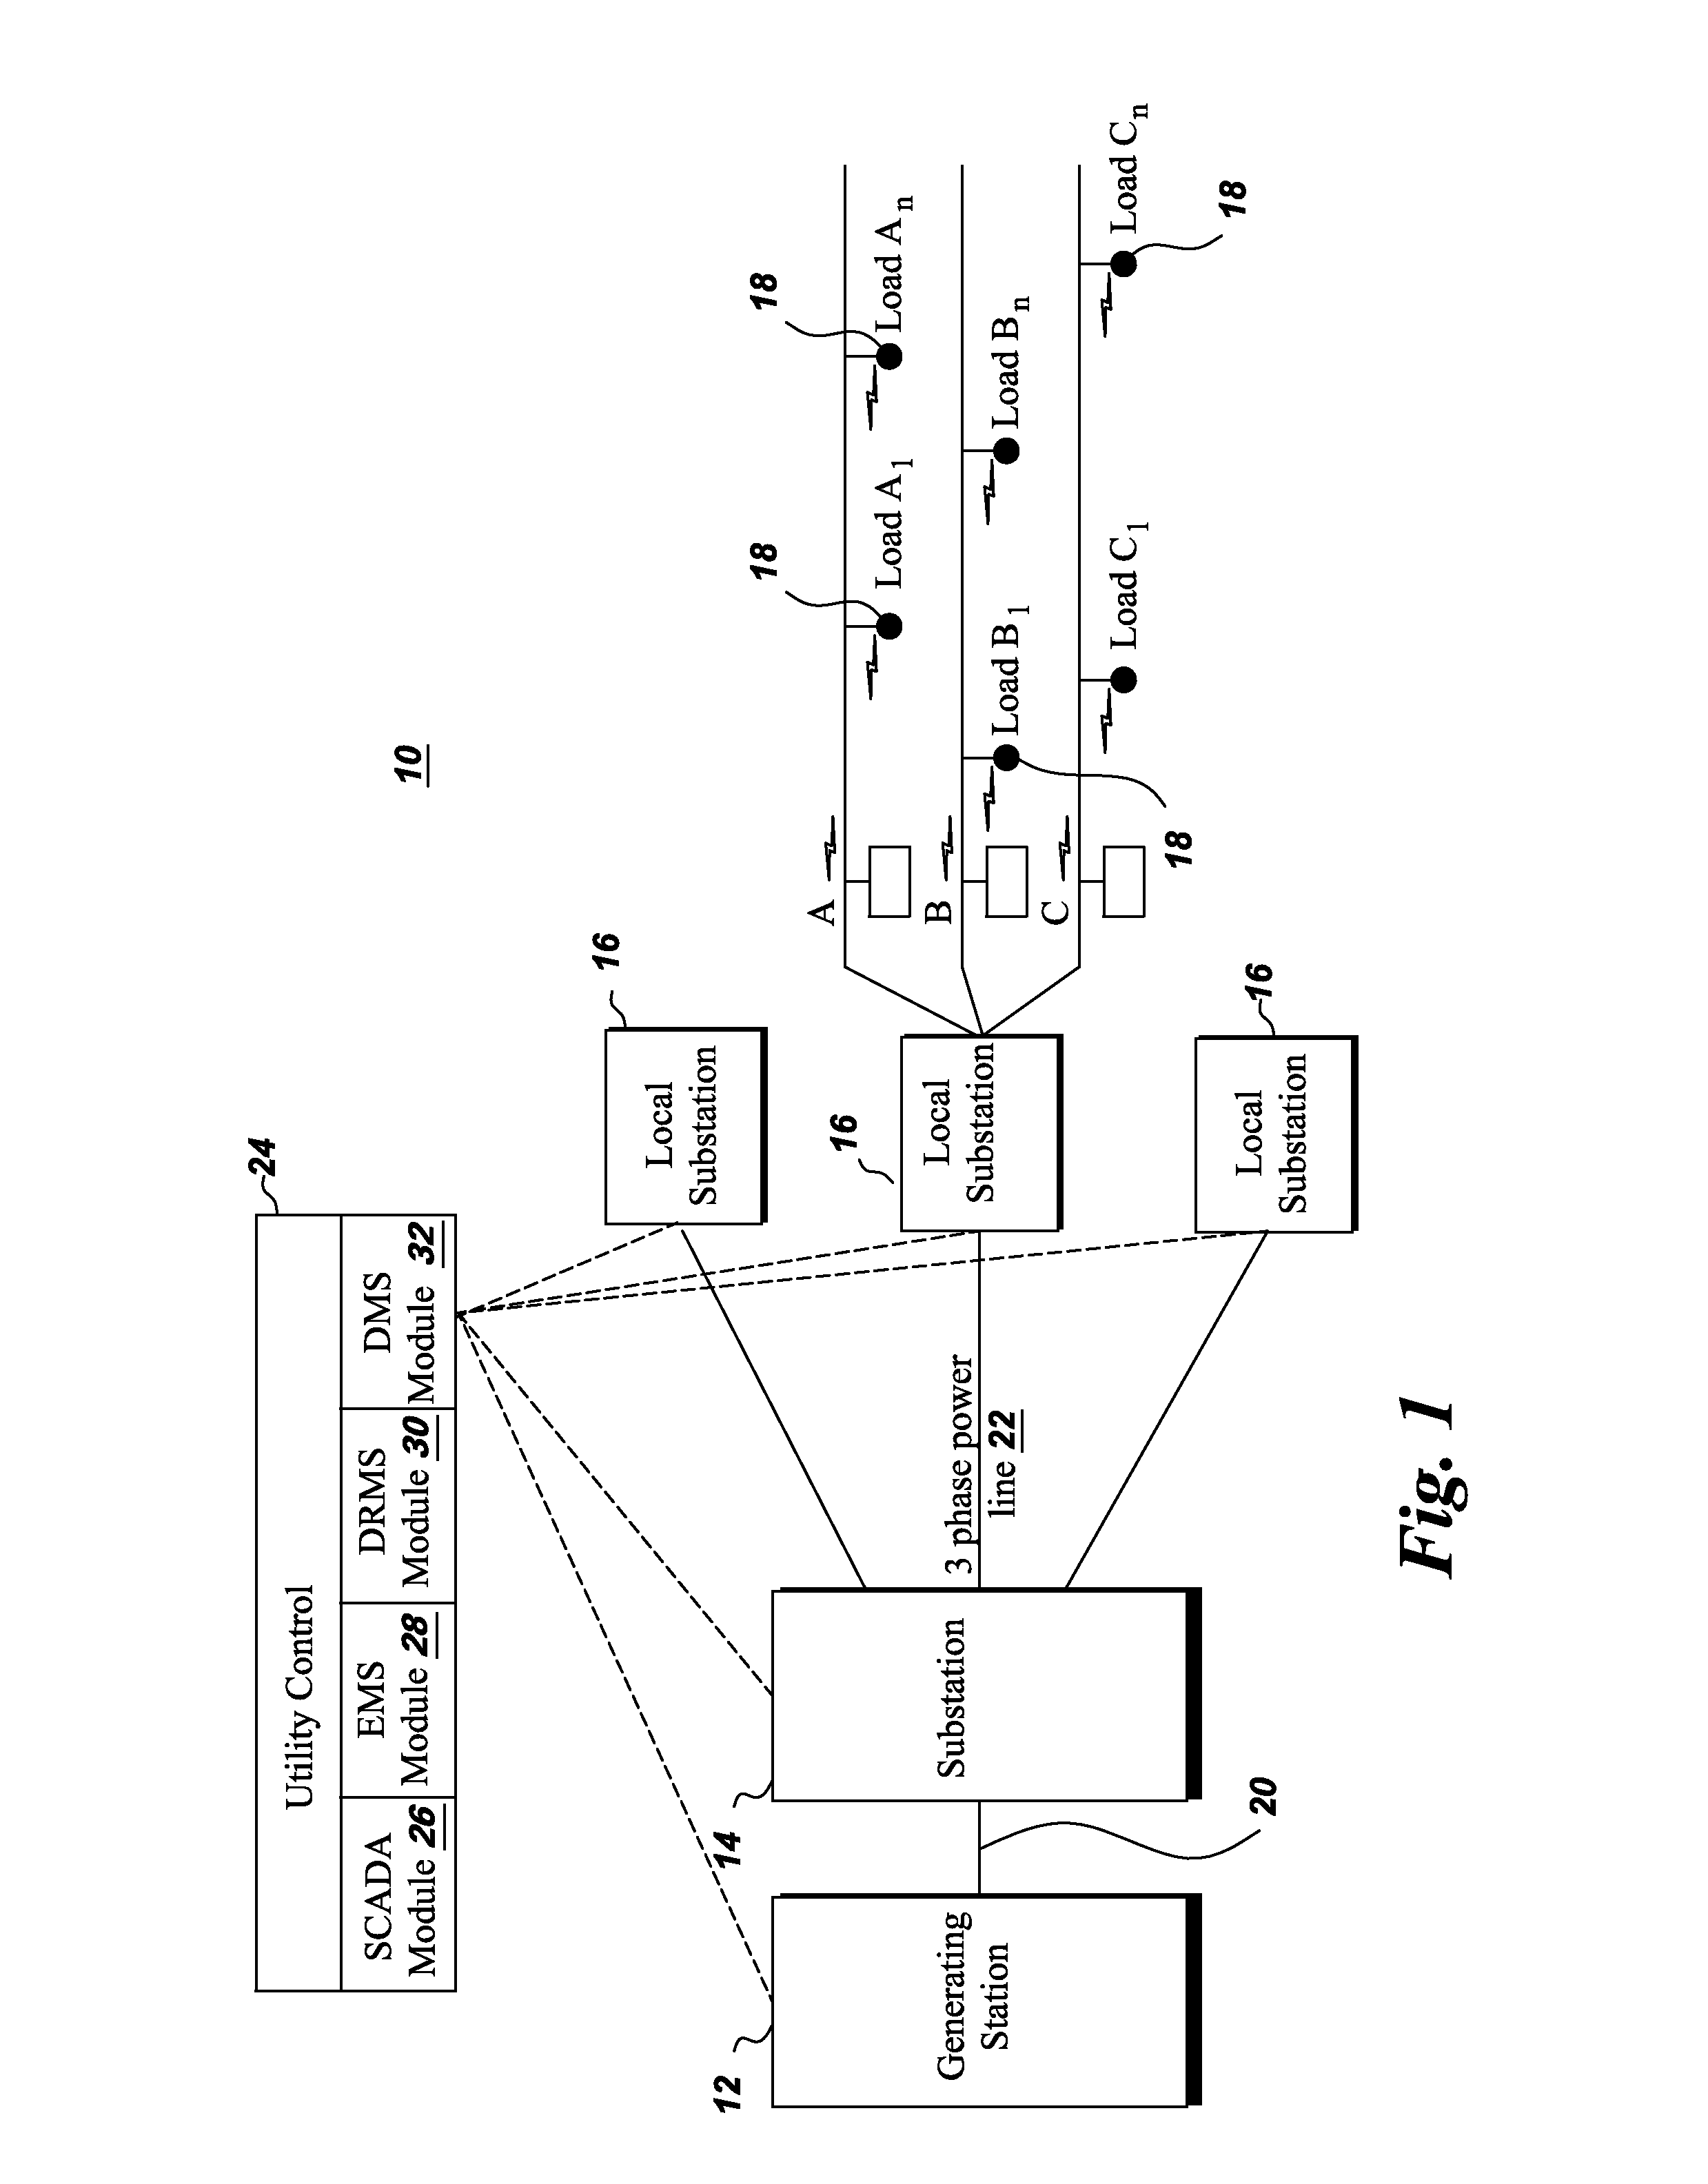 System and method for load forecasting